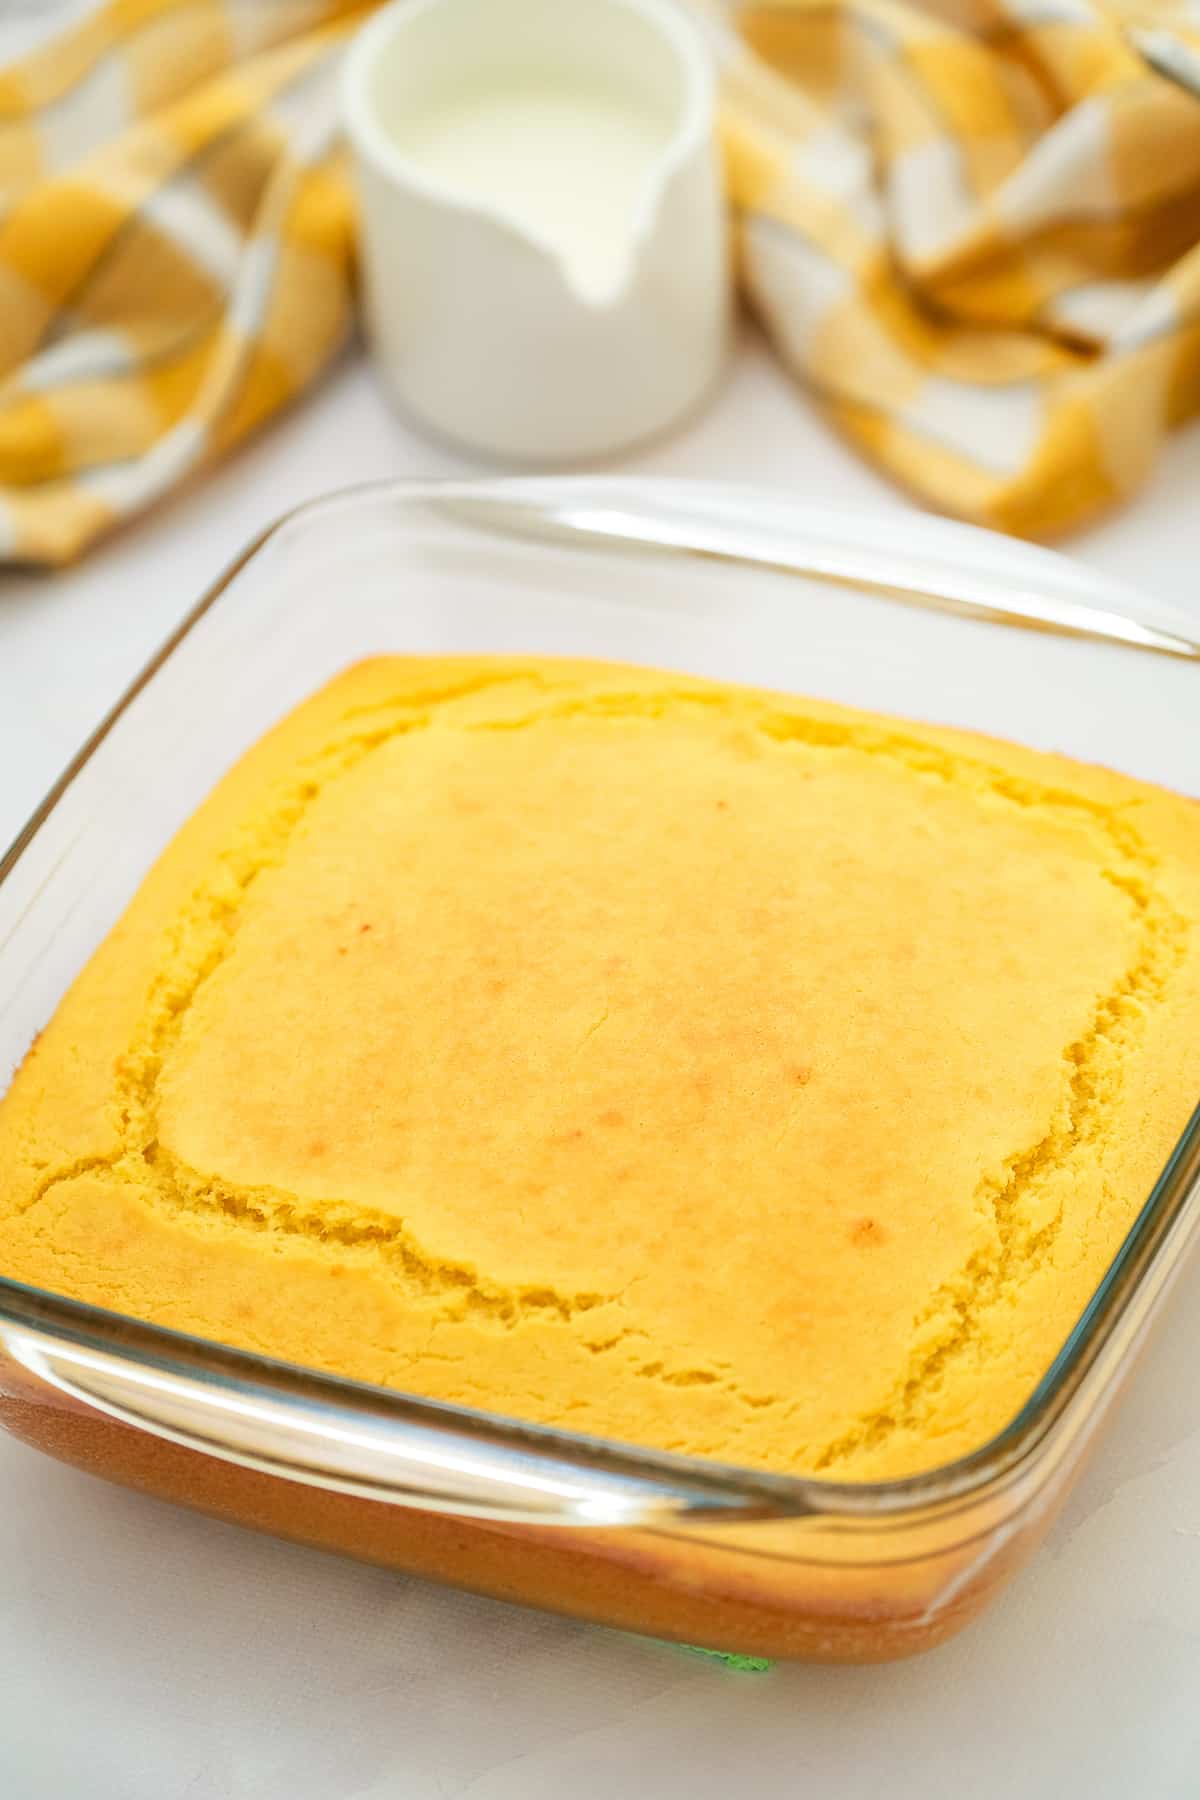 Square glass baking dish with baked cornbread in it.